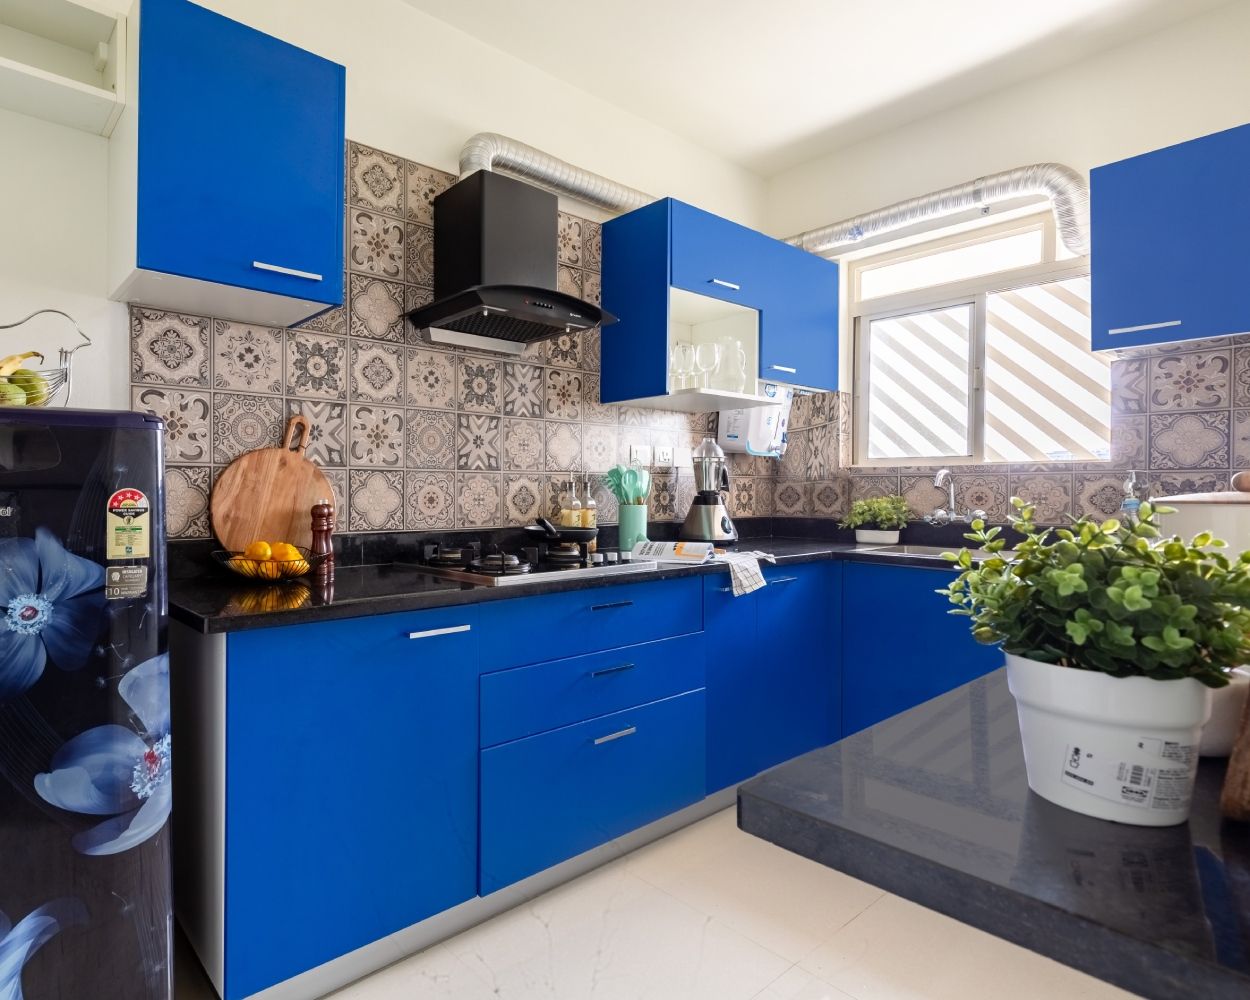 Modern L-Shaped Kitchen Cabinet Design With Spacious Blue Kitchen Cabinets